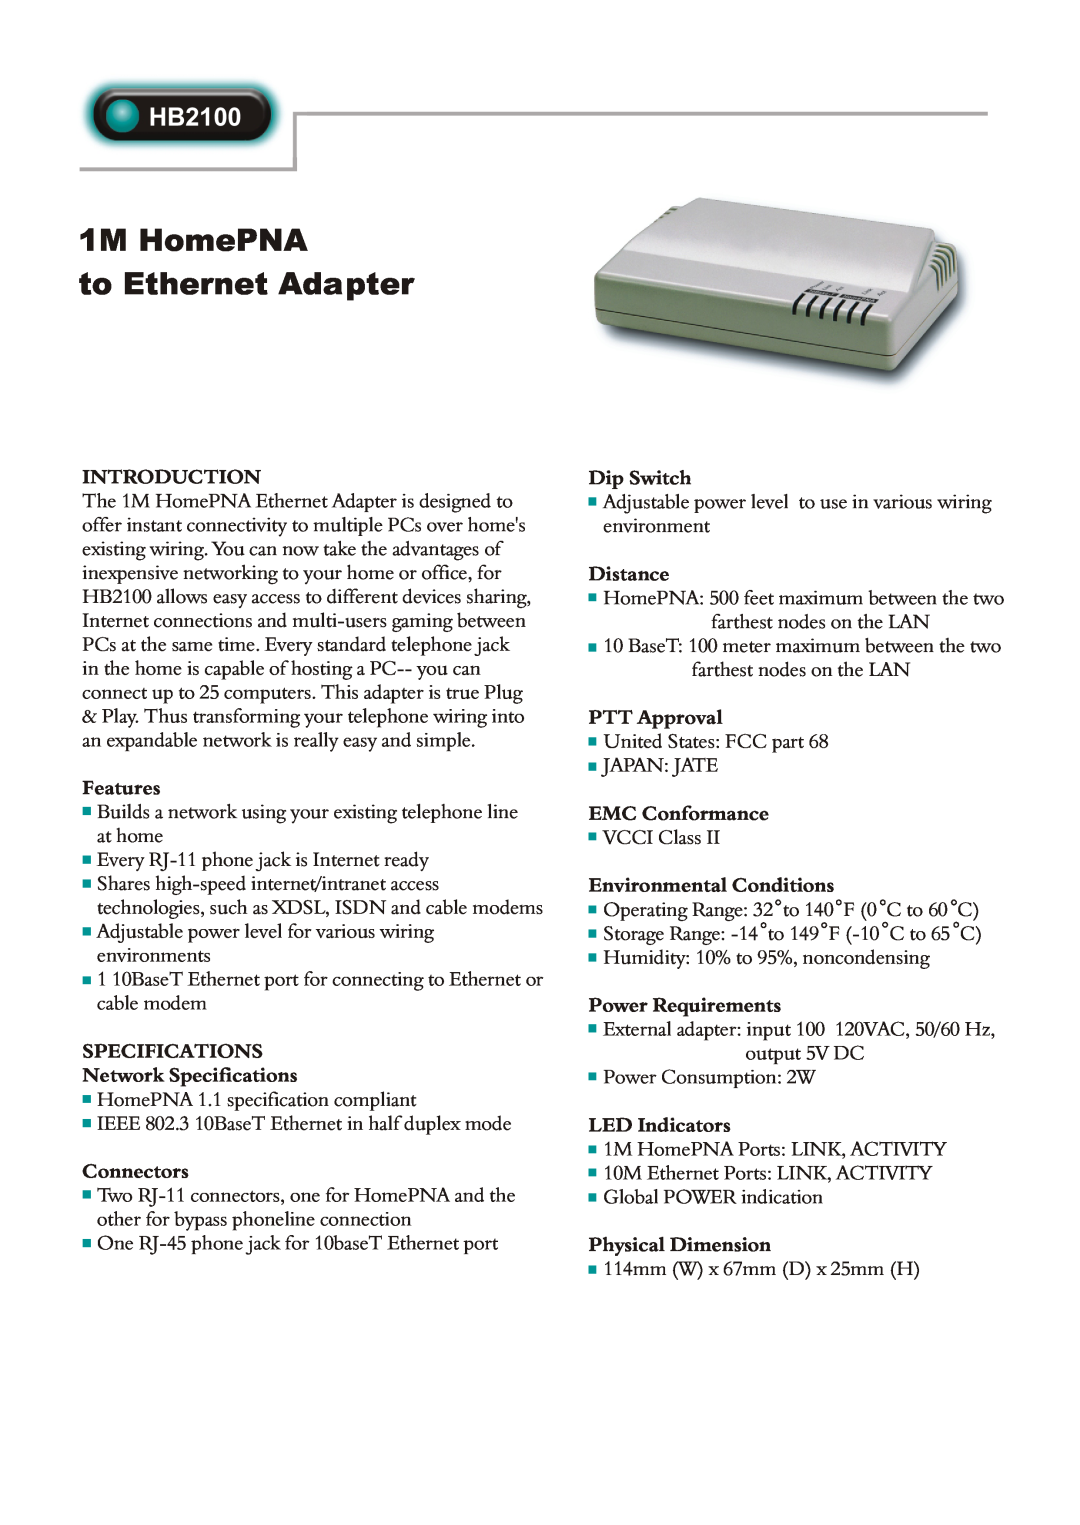 Abocom HB2100 specifications 1M HomePNA to Ethernet Adapter 